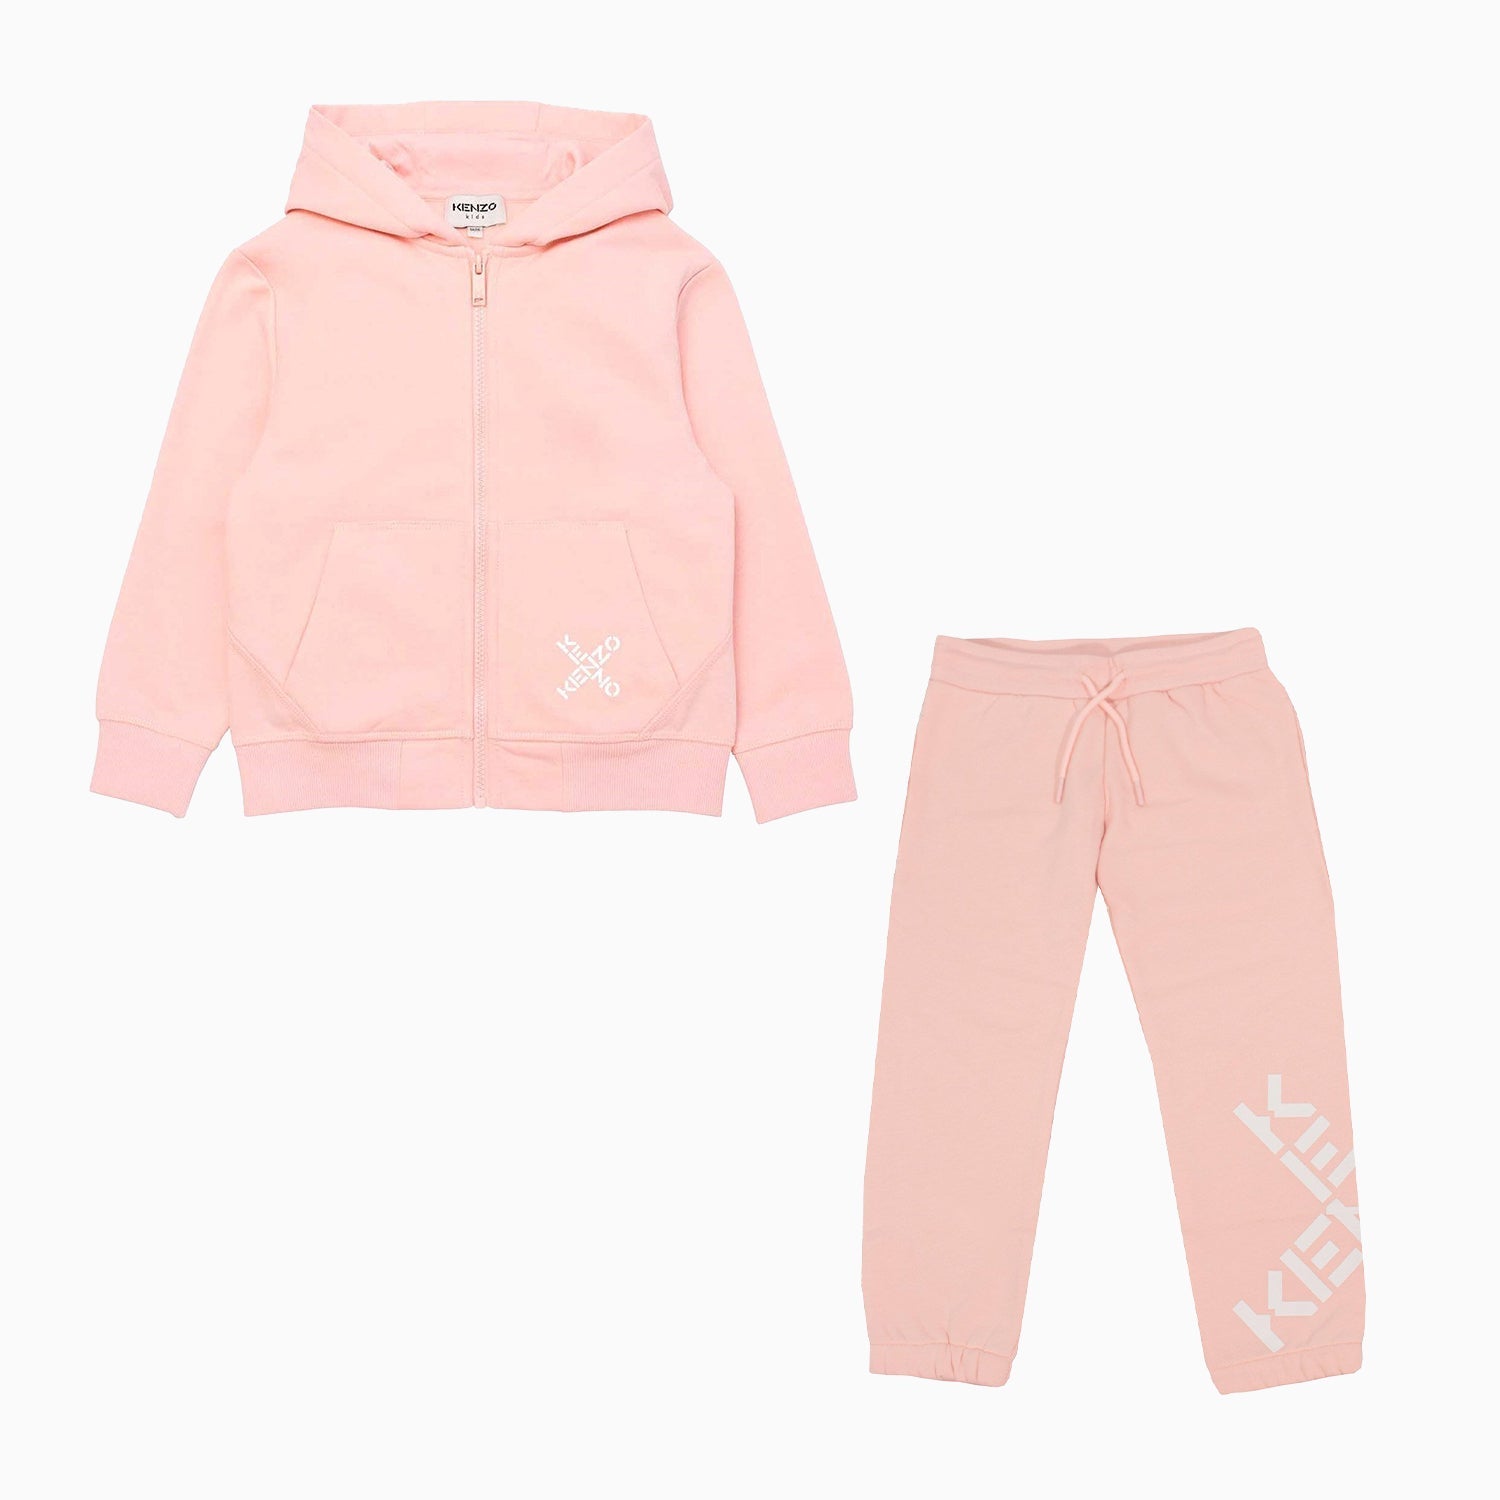 Kenzo Kid's Cross Logo Printed Outfit - Color: Pink - Kids Premium Clothing -